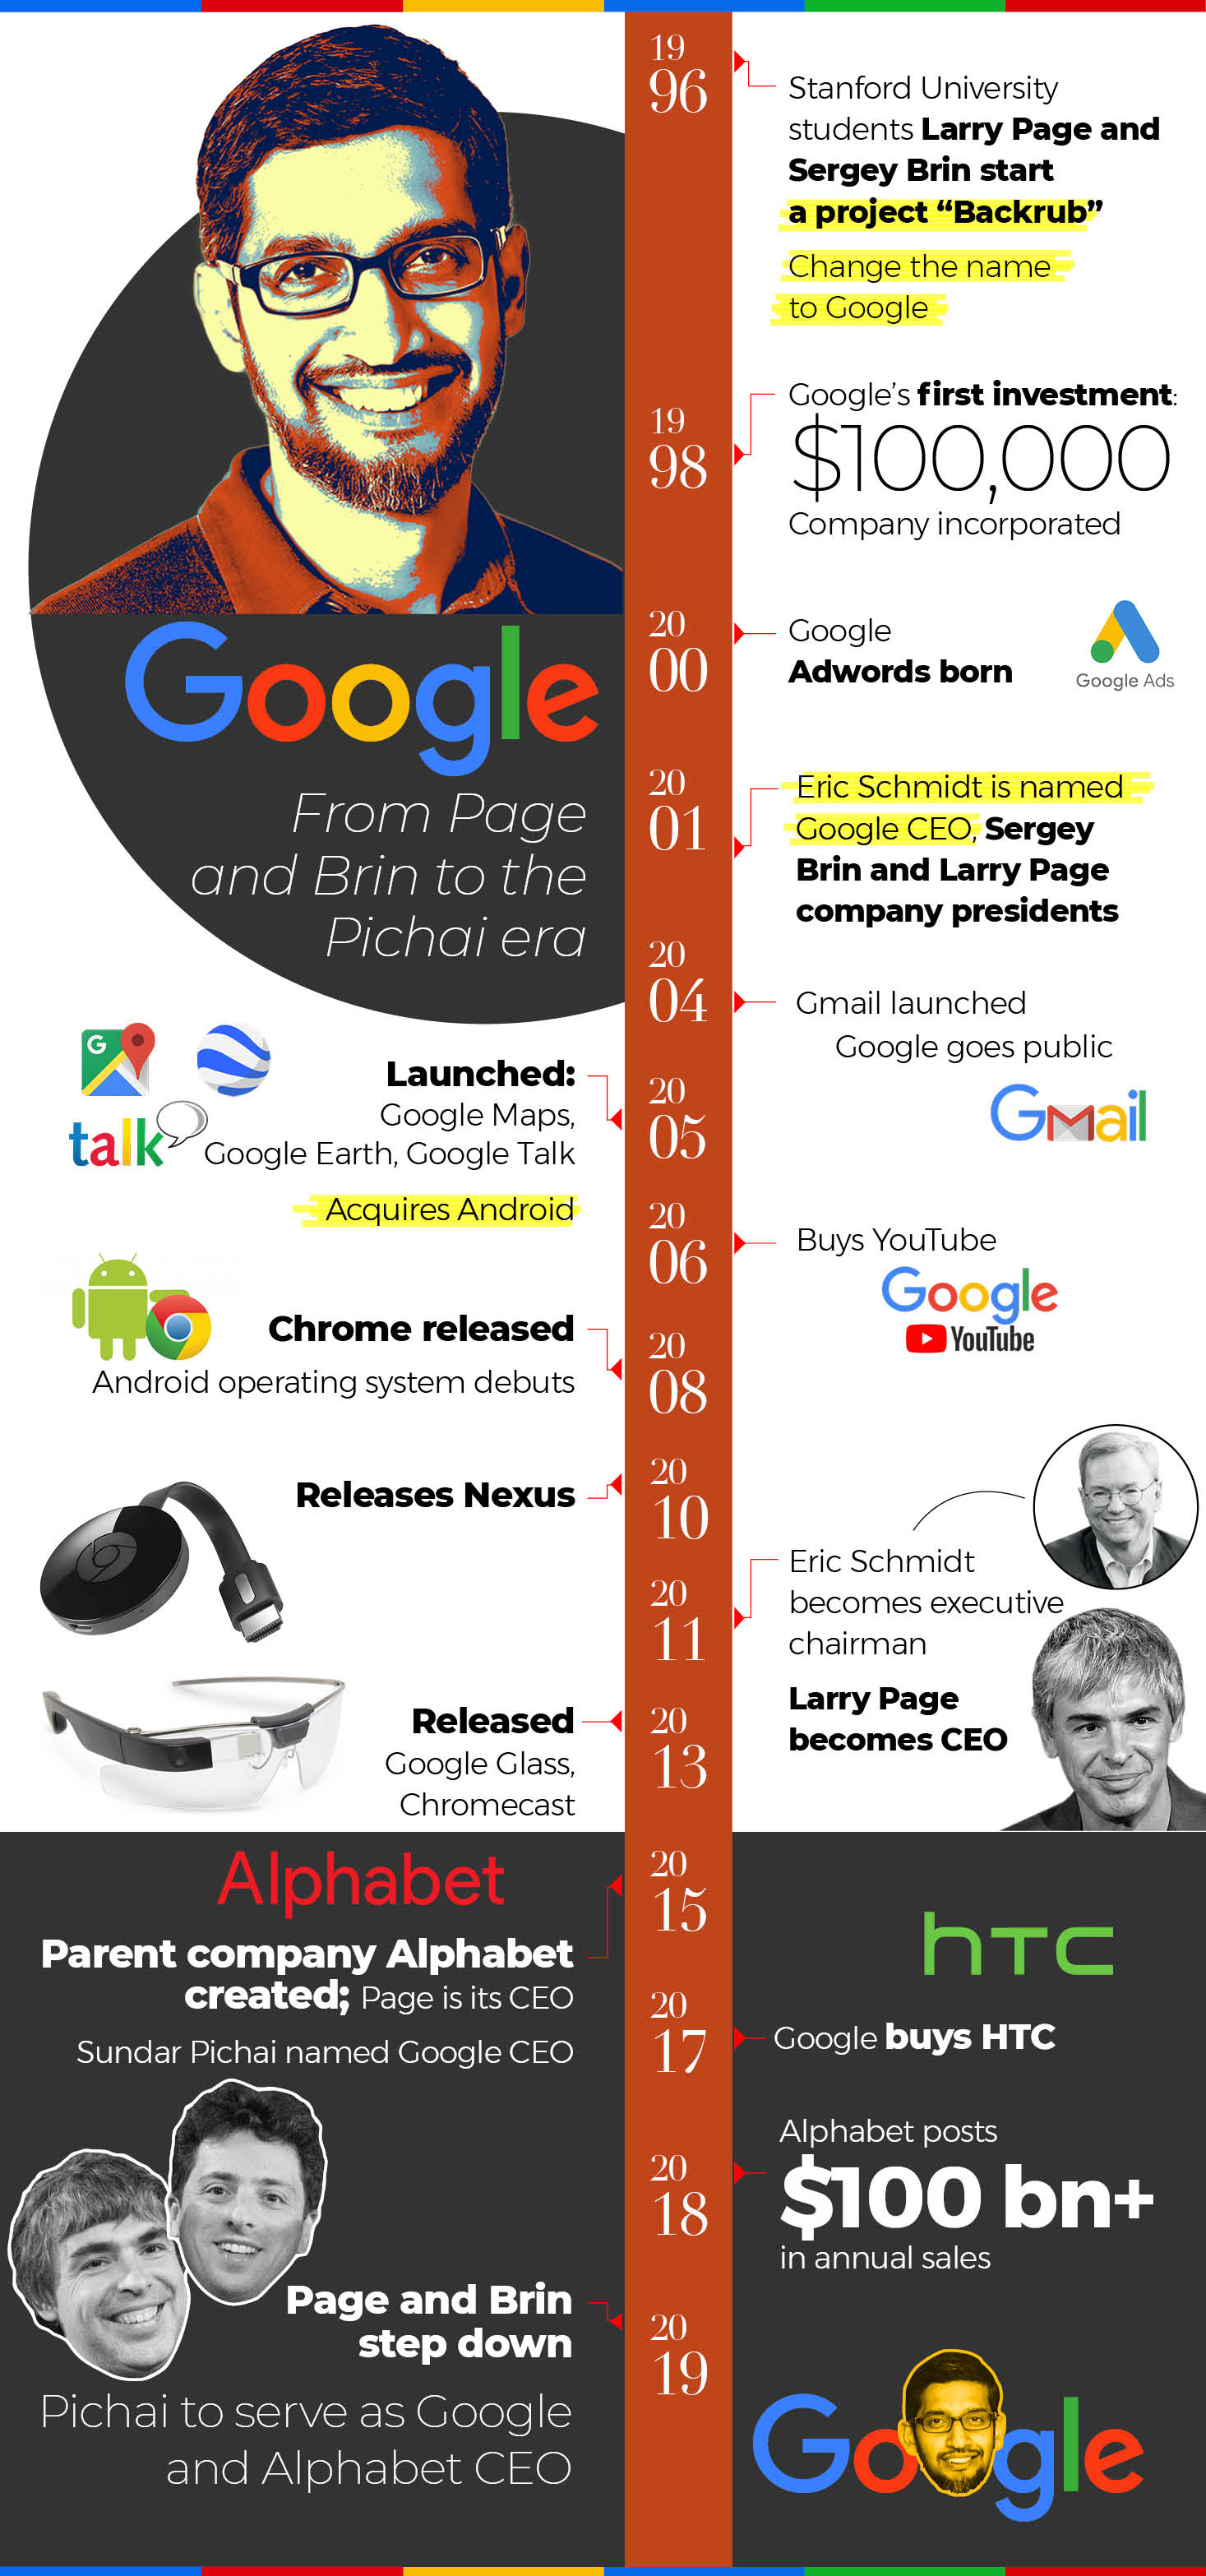 A timeline of Google's incredible journey as Page and Brin step down